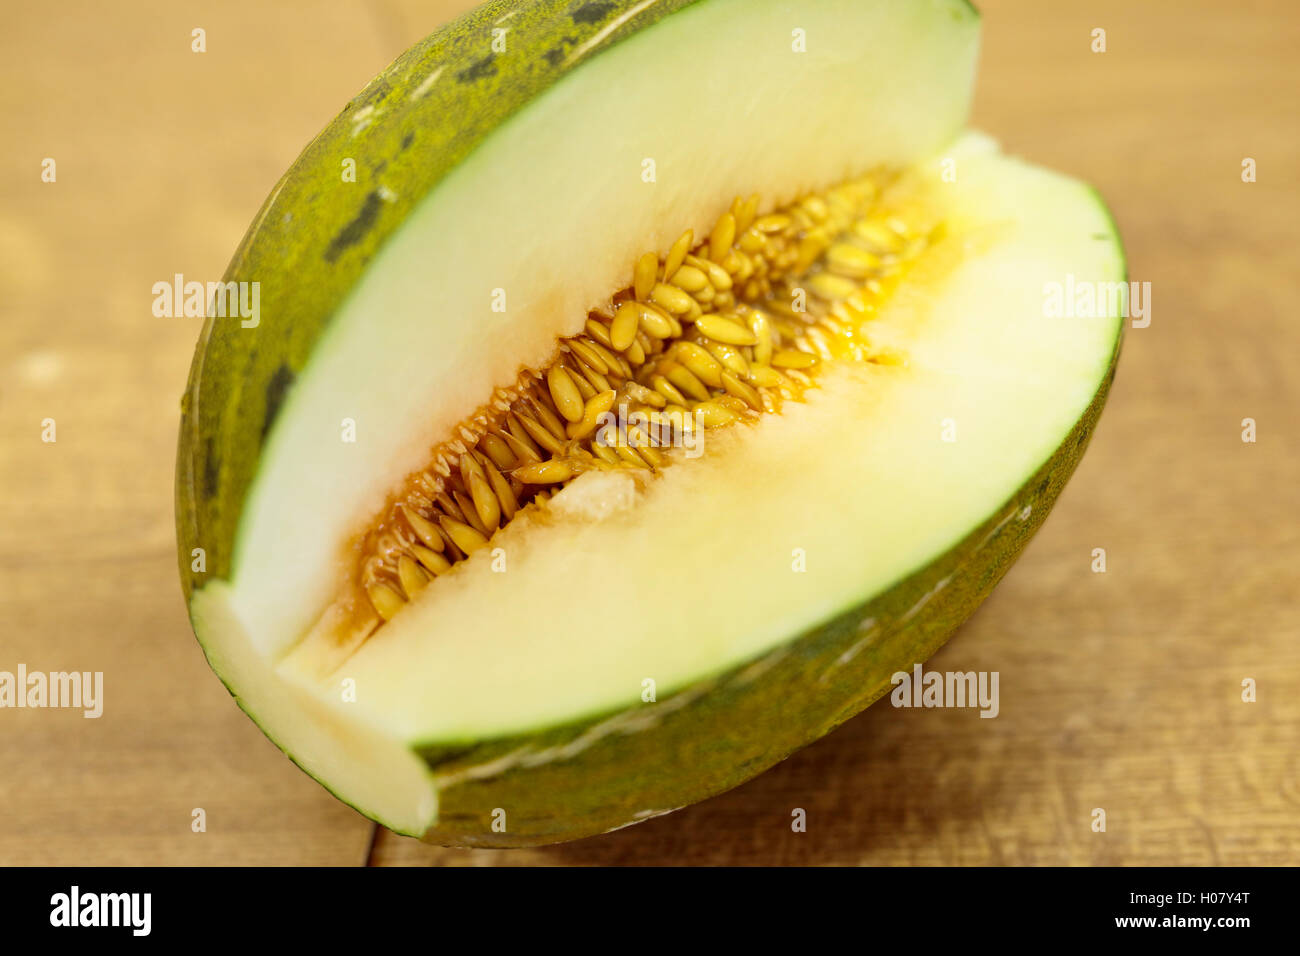 Toad skin melon halved on a wooden table. Stock Photo